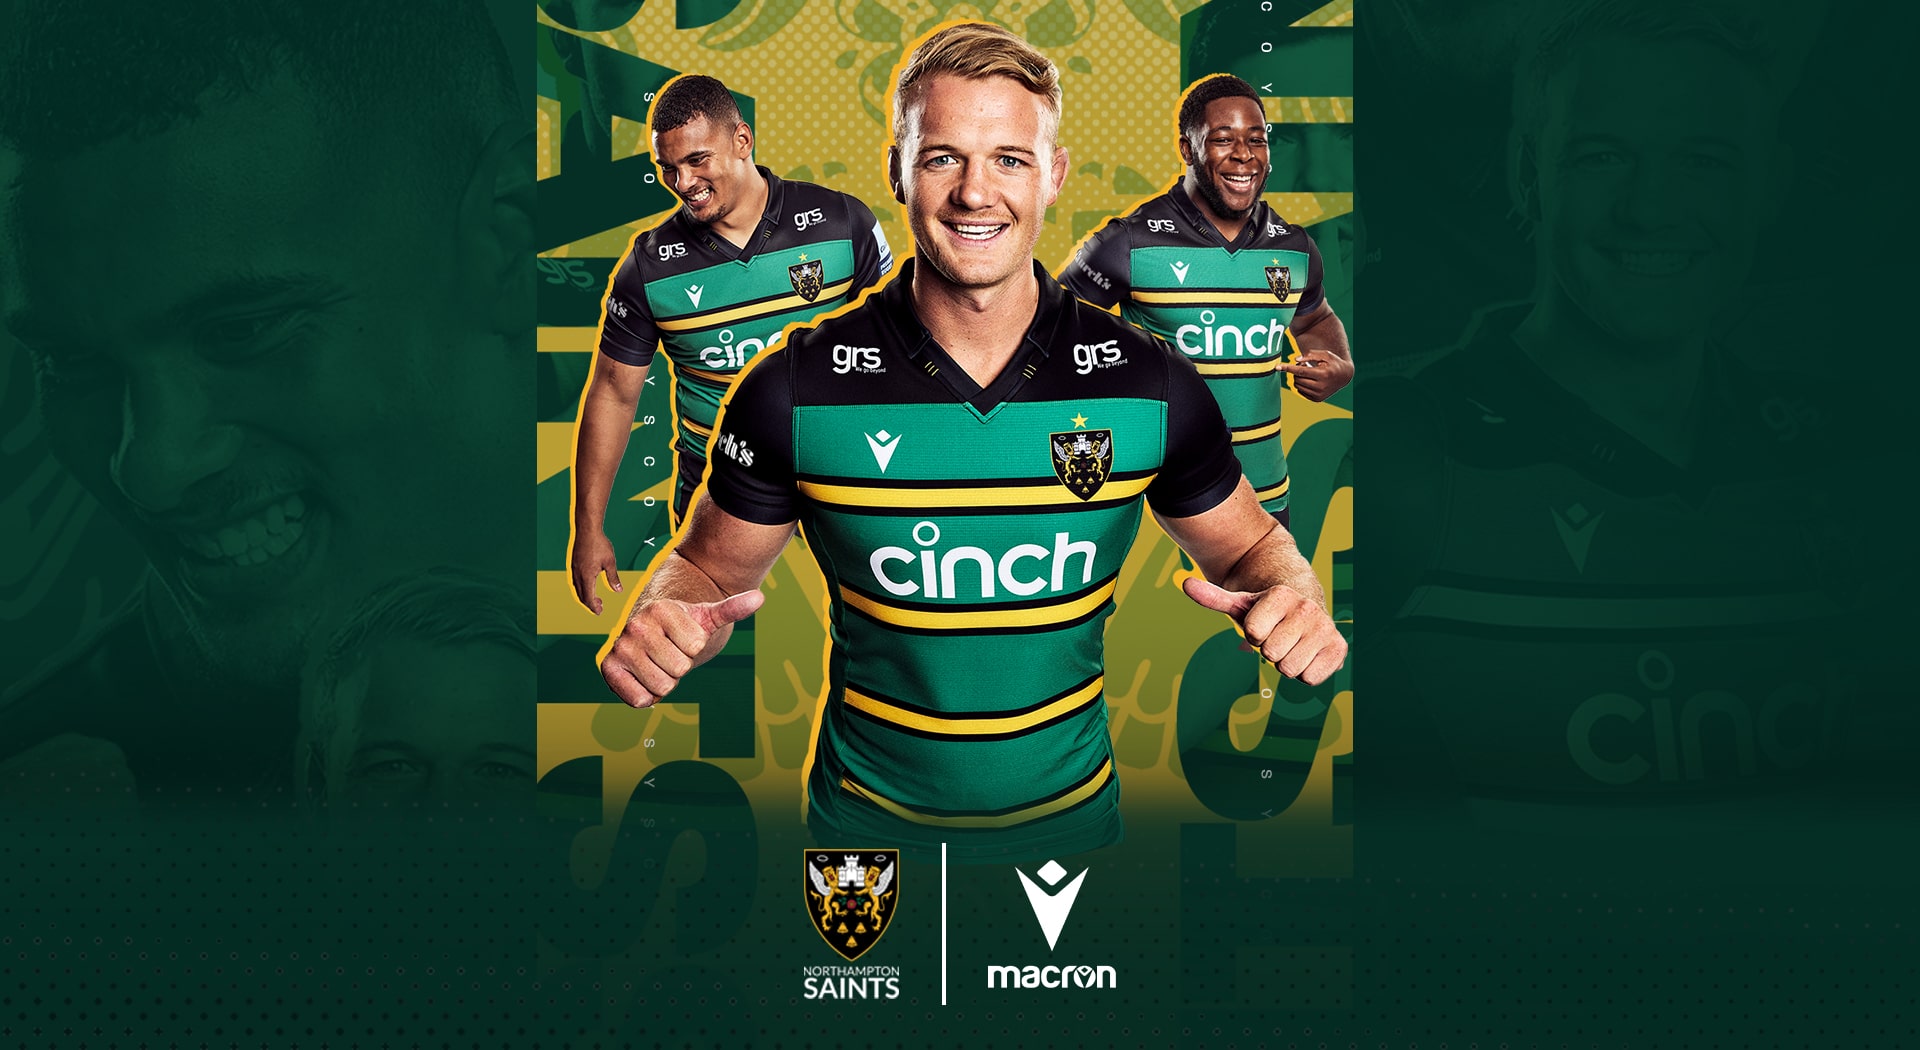 Macron Respect for tradition in the new “home” shirt of Northampton Saints  | Imagen 1